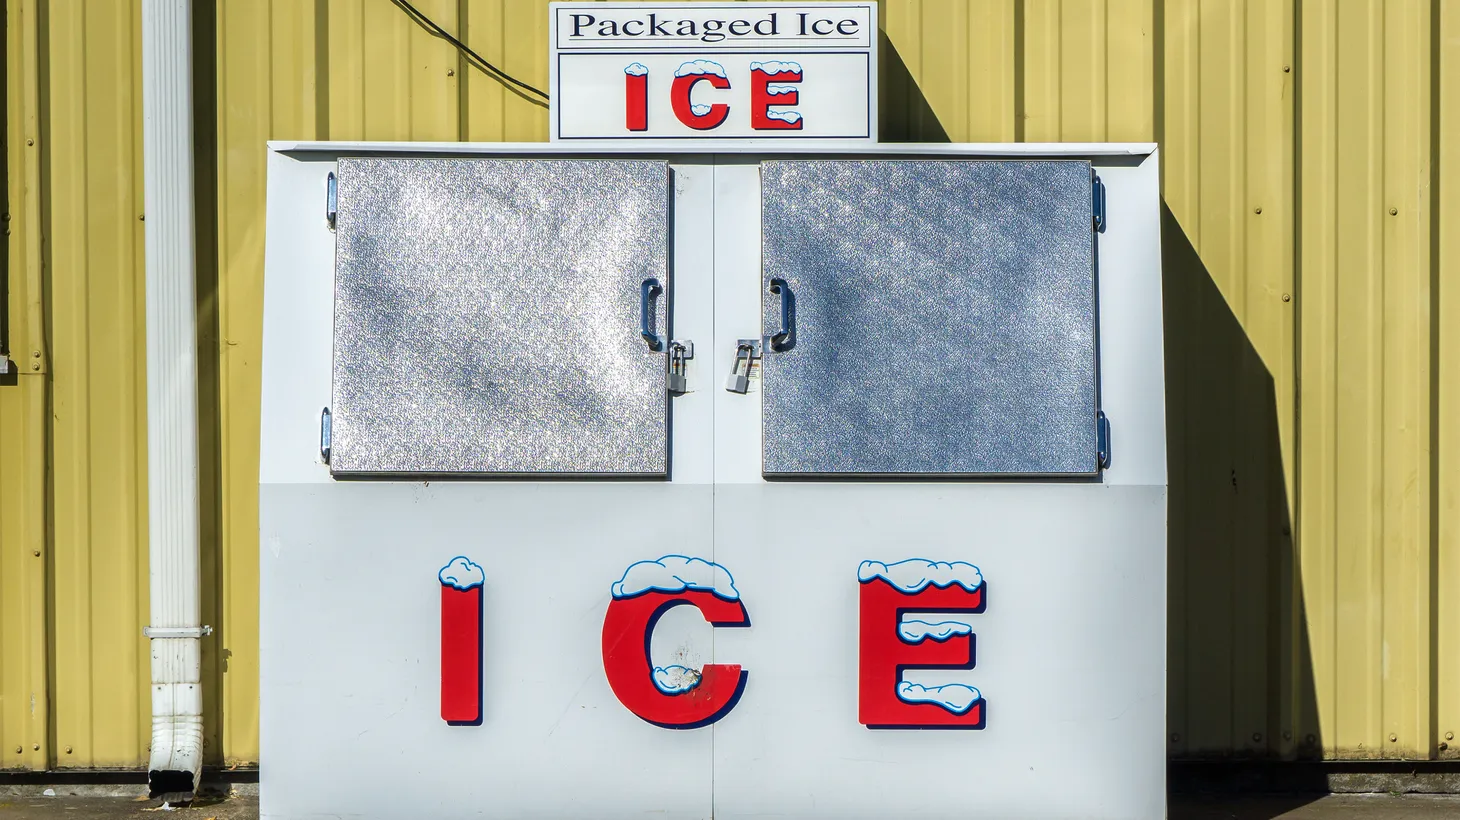 The ice machine was invented by a small-town doctor in order to find a cure for yellow fever.